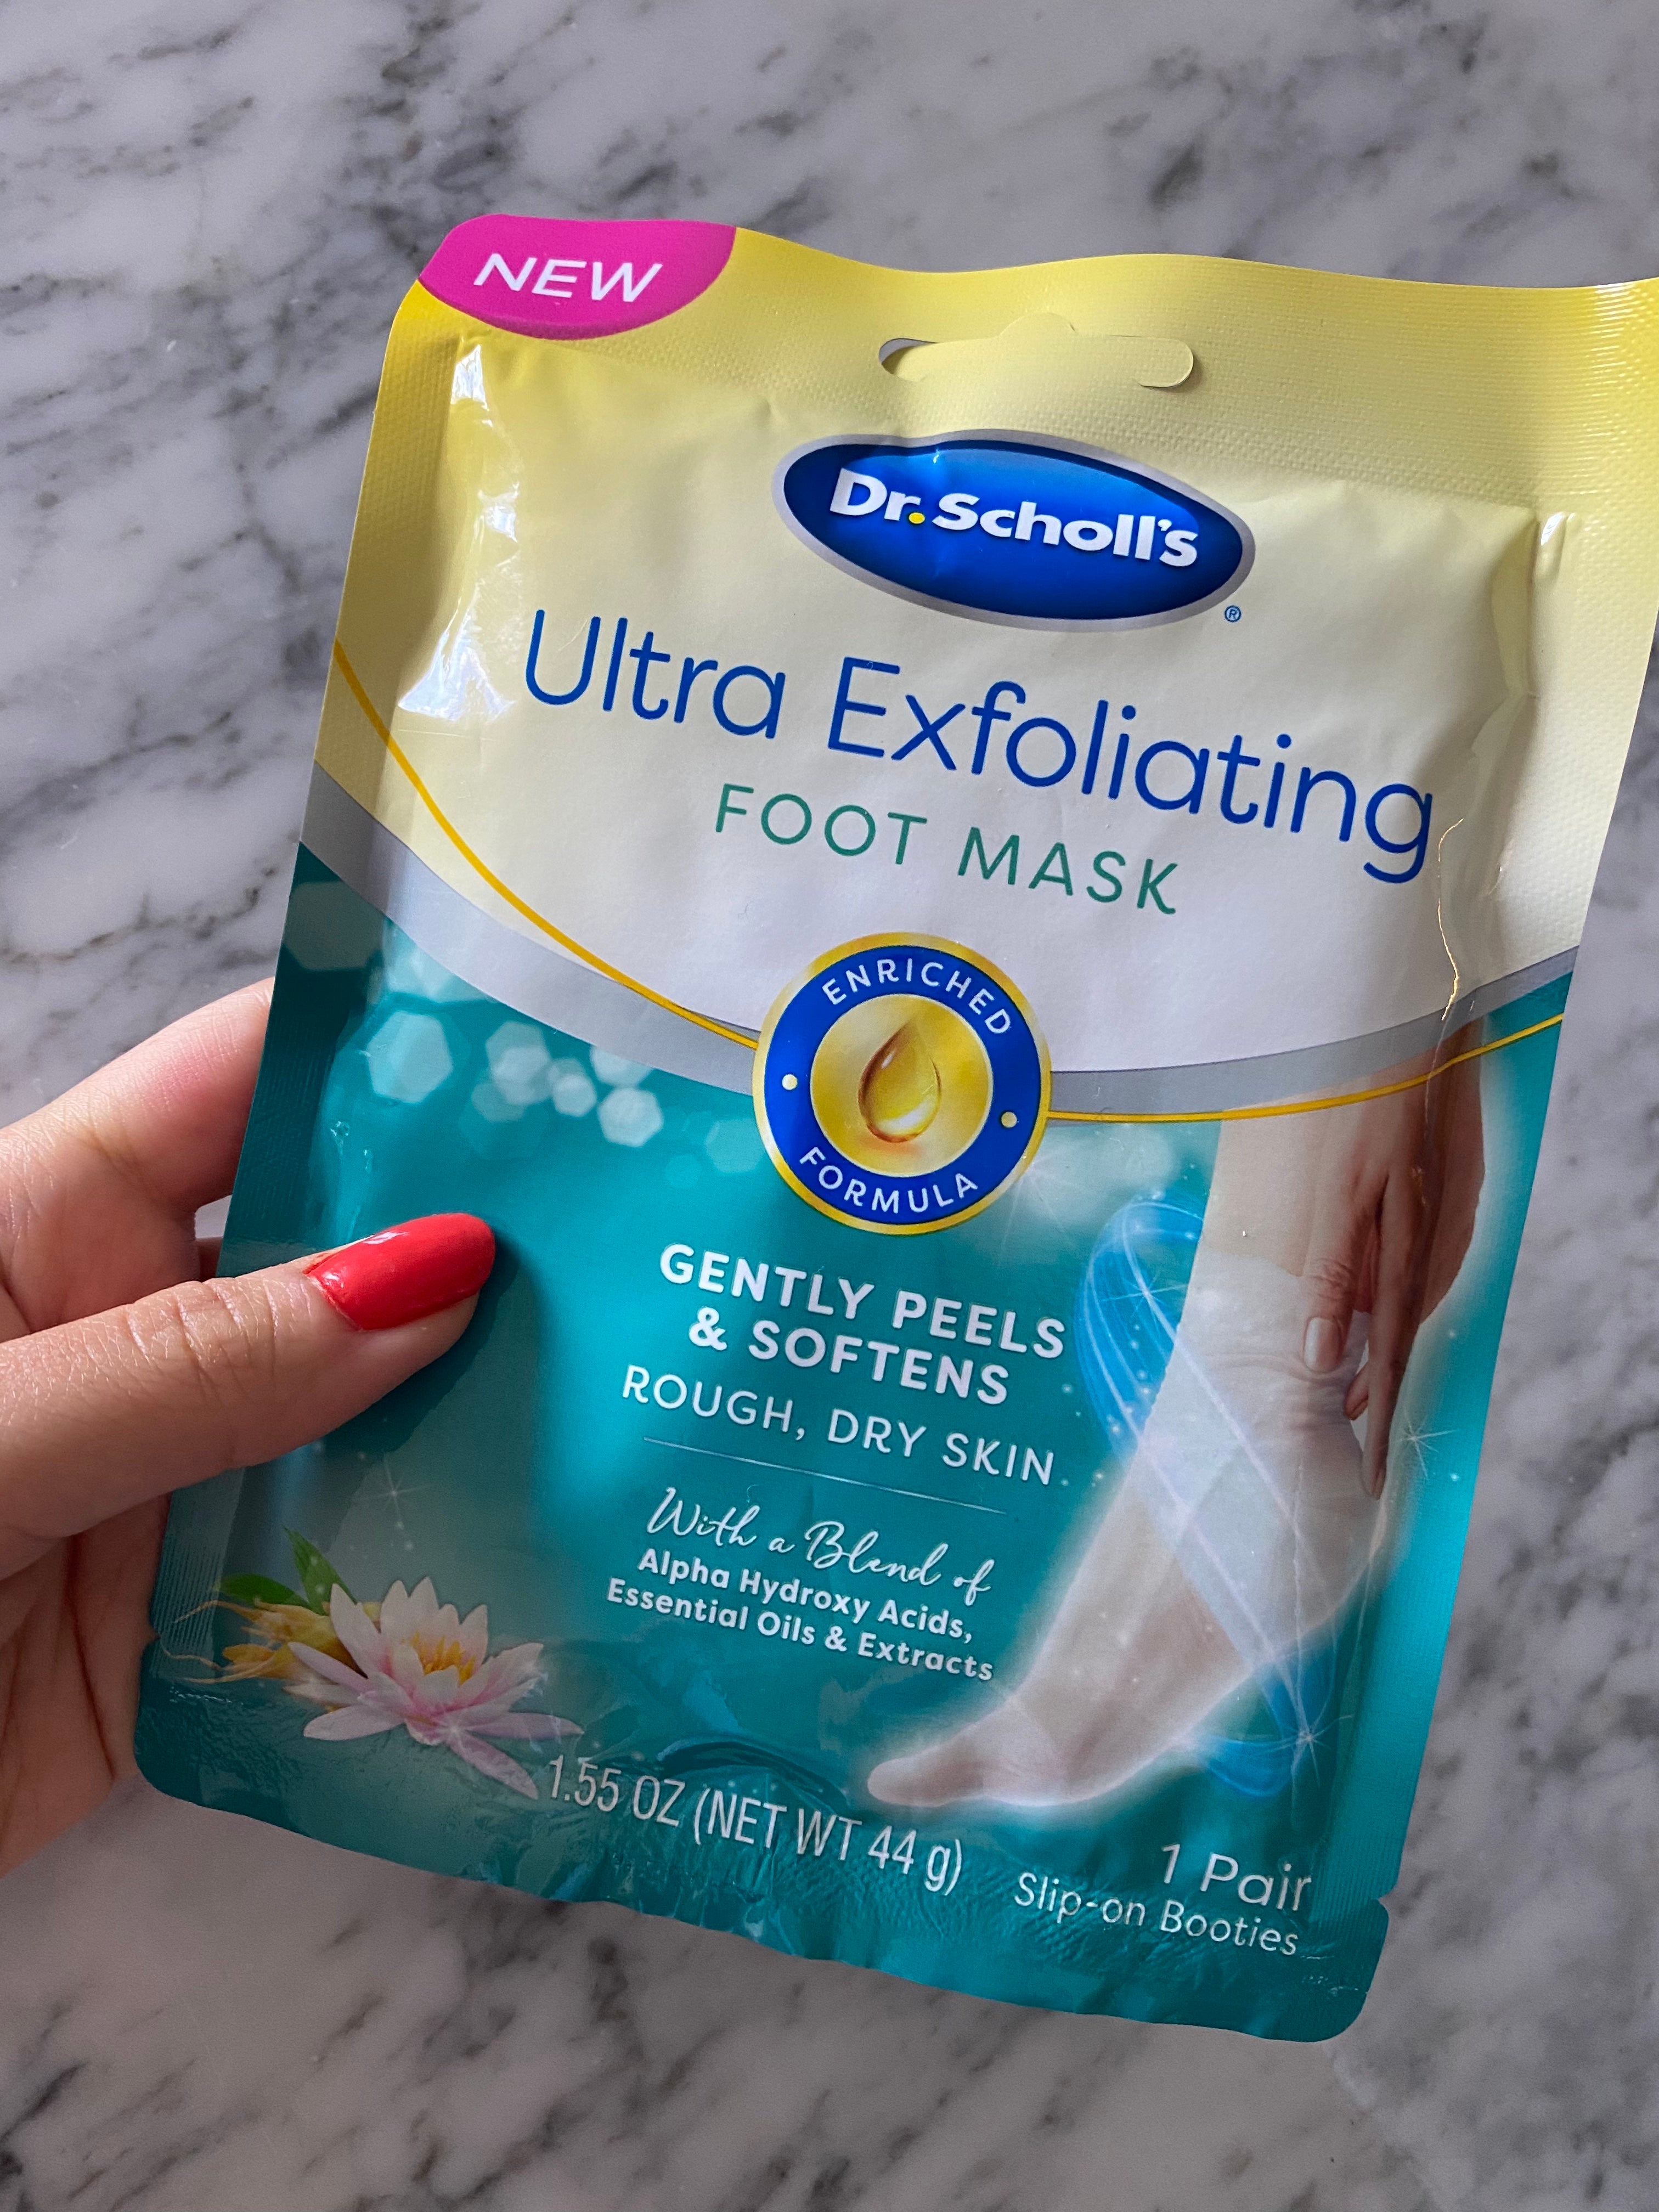 Dr. Scholl's puts feet first with latest launches